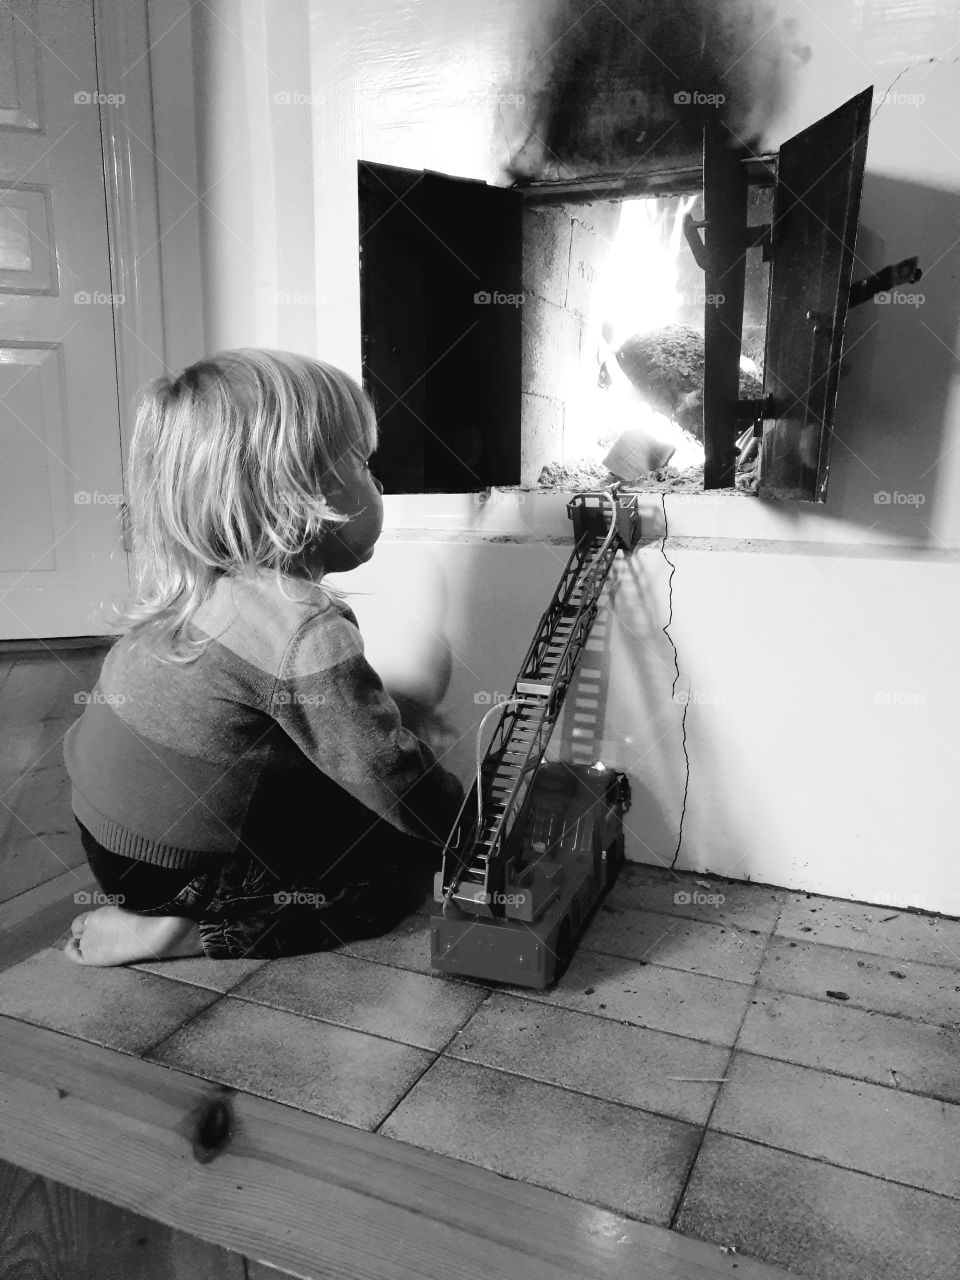 A young child estinguish the fire with a firetruck.